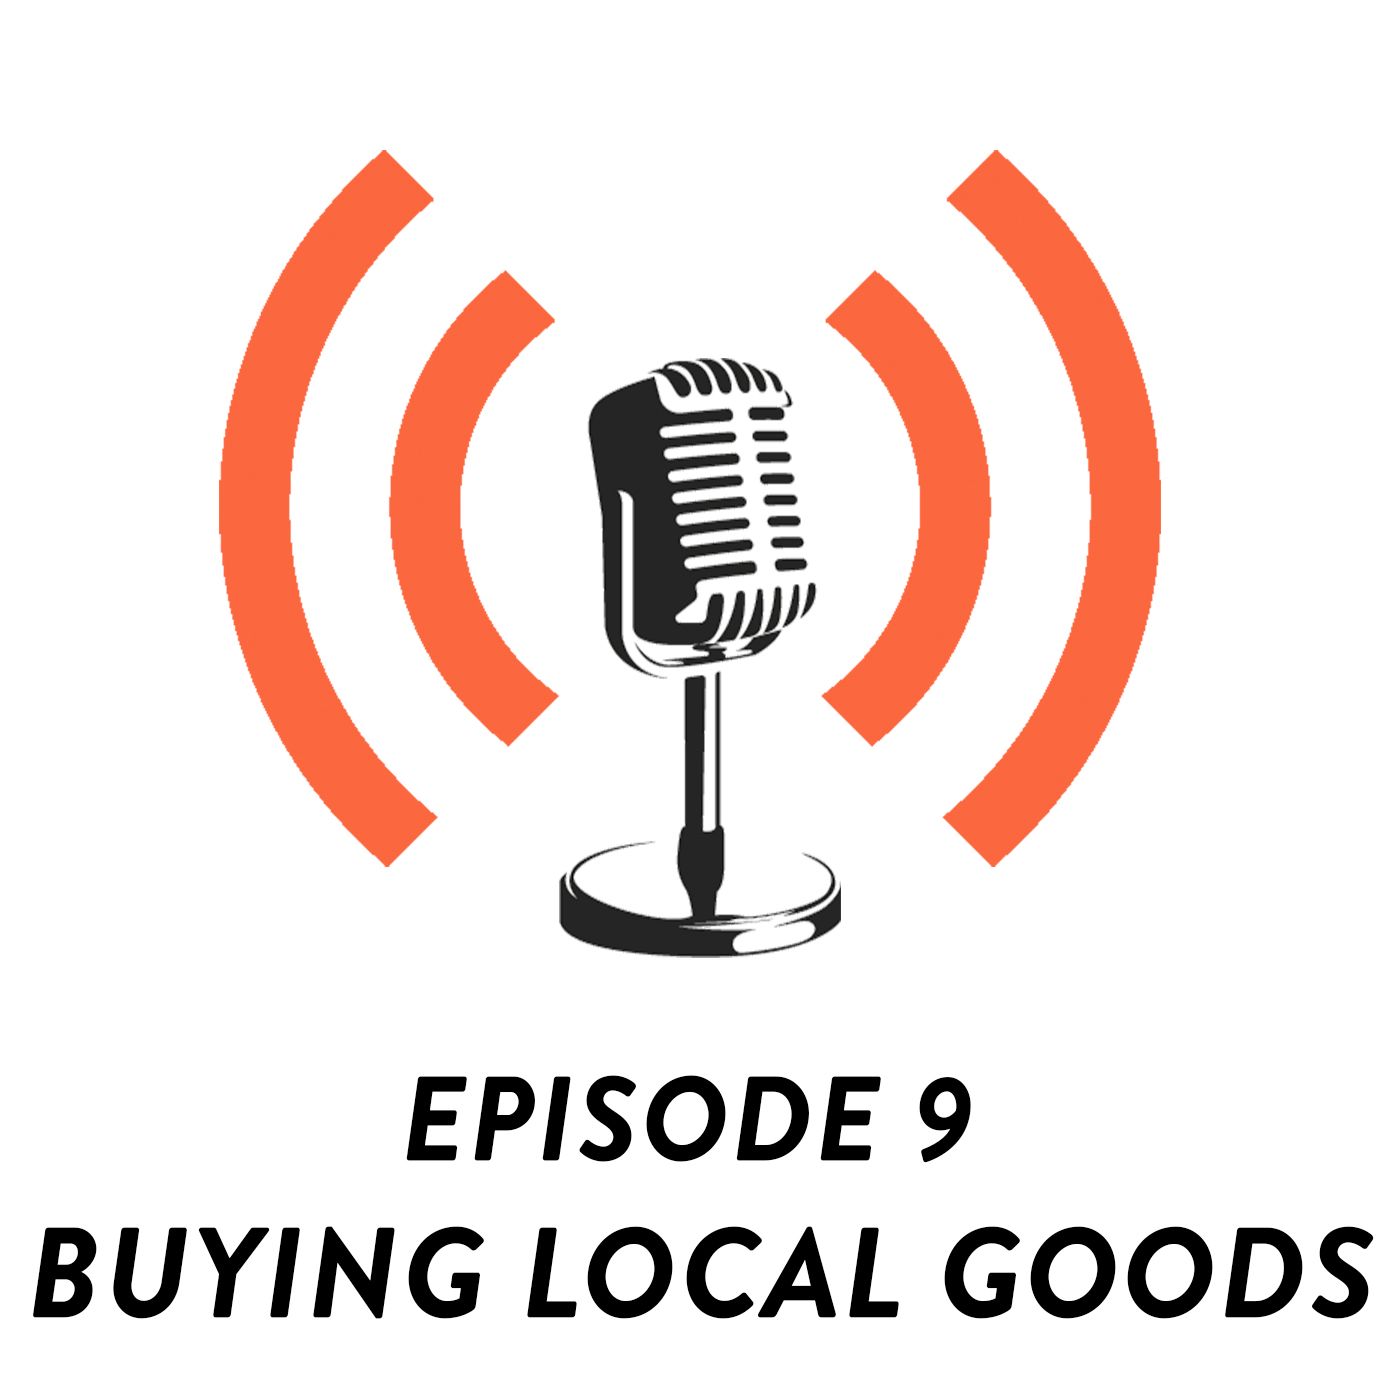 S01E09 - Buying Local Goods: Are We Still Afraid?